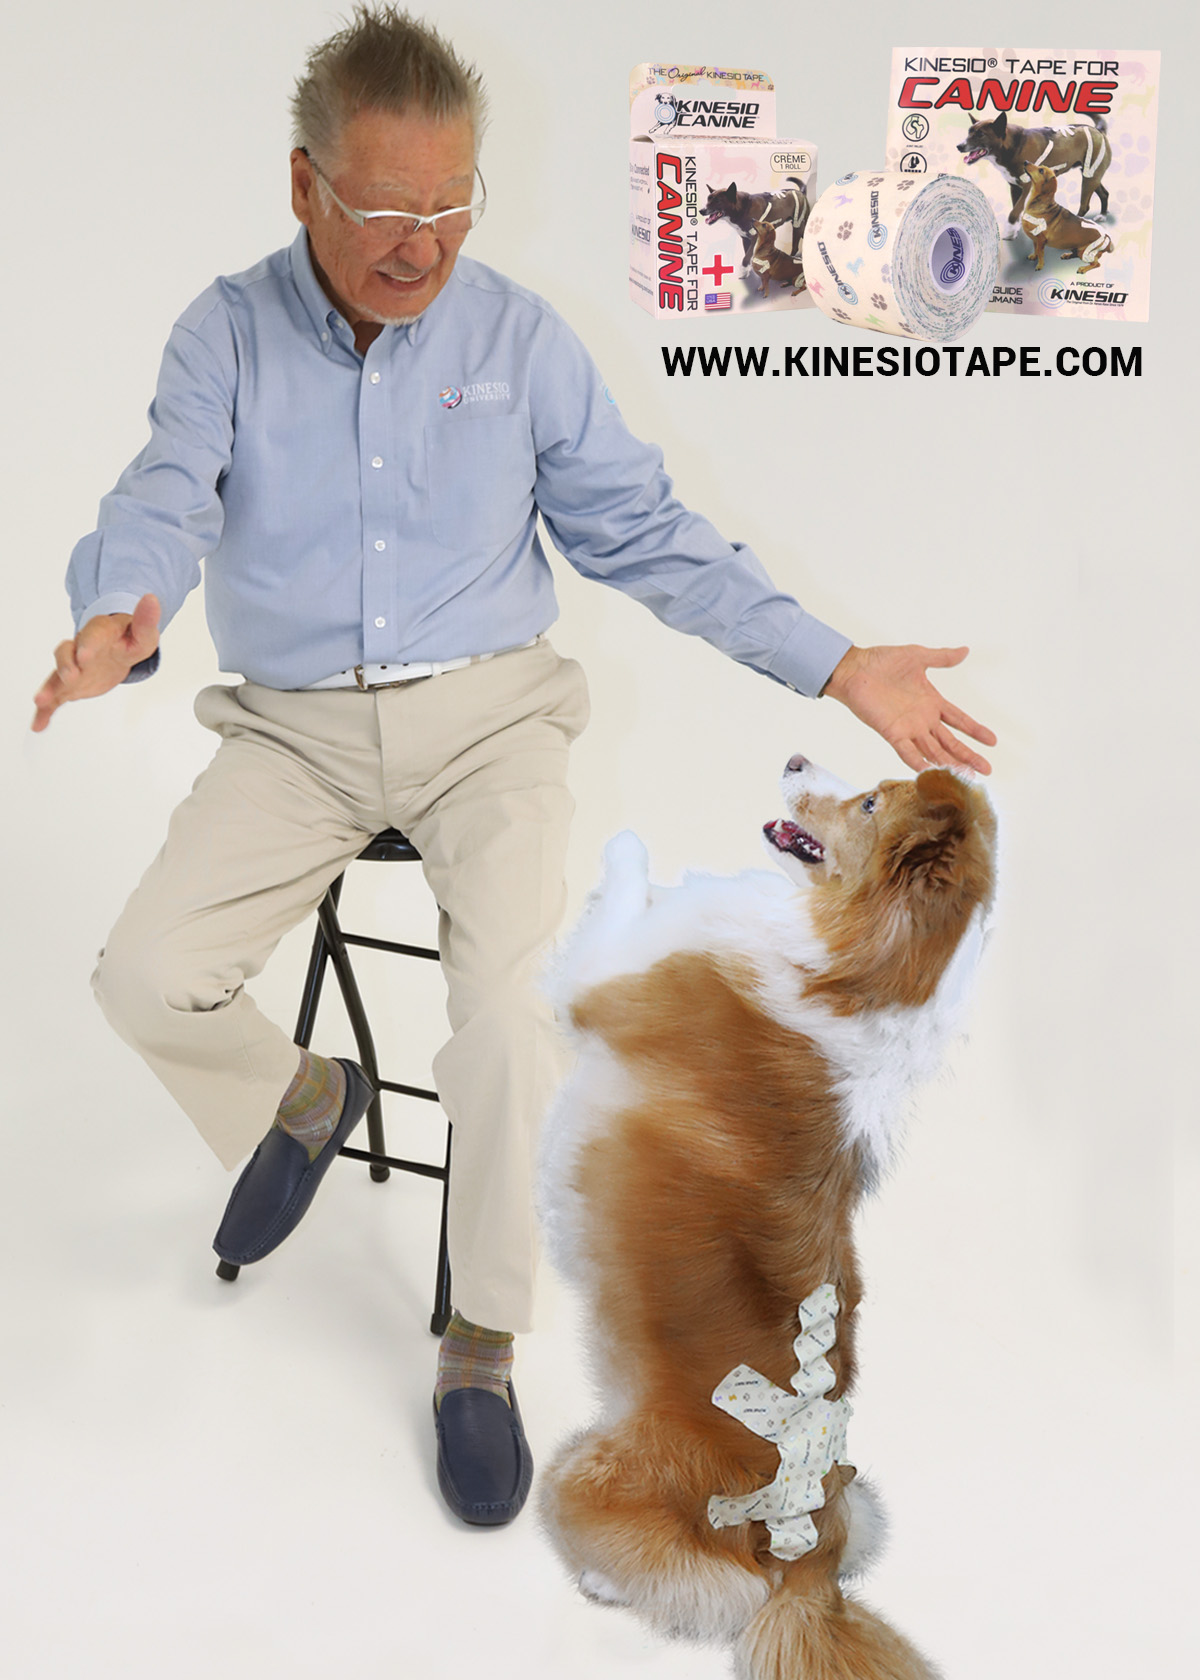 Dr. Kenzo Kase, inventor of elastic therapeutic taping and Founder of Kinesio with a furry friend